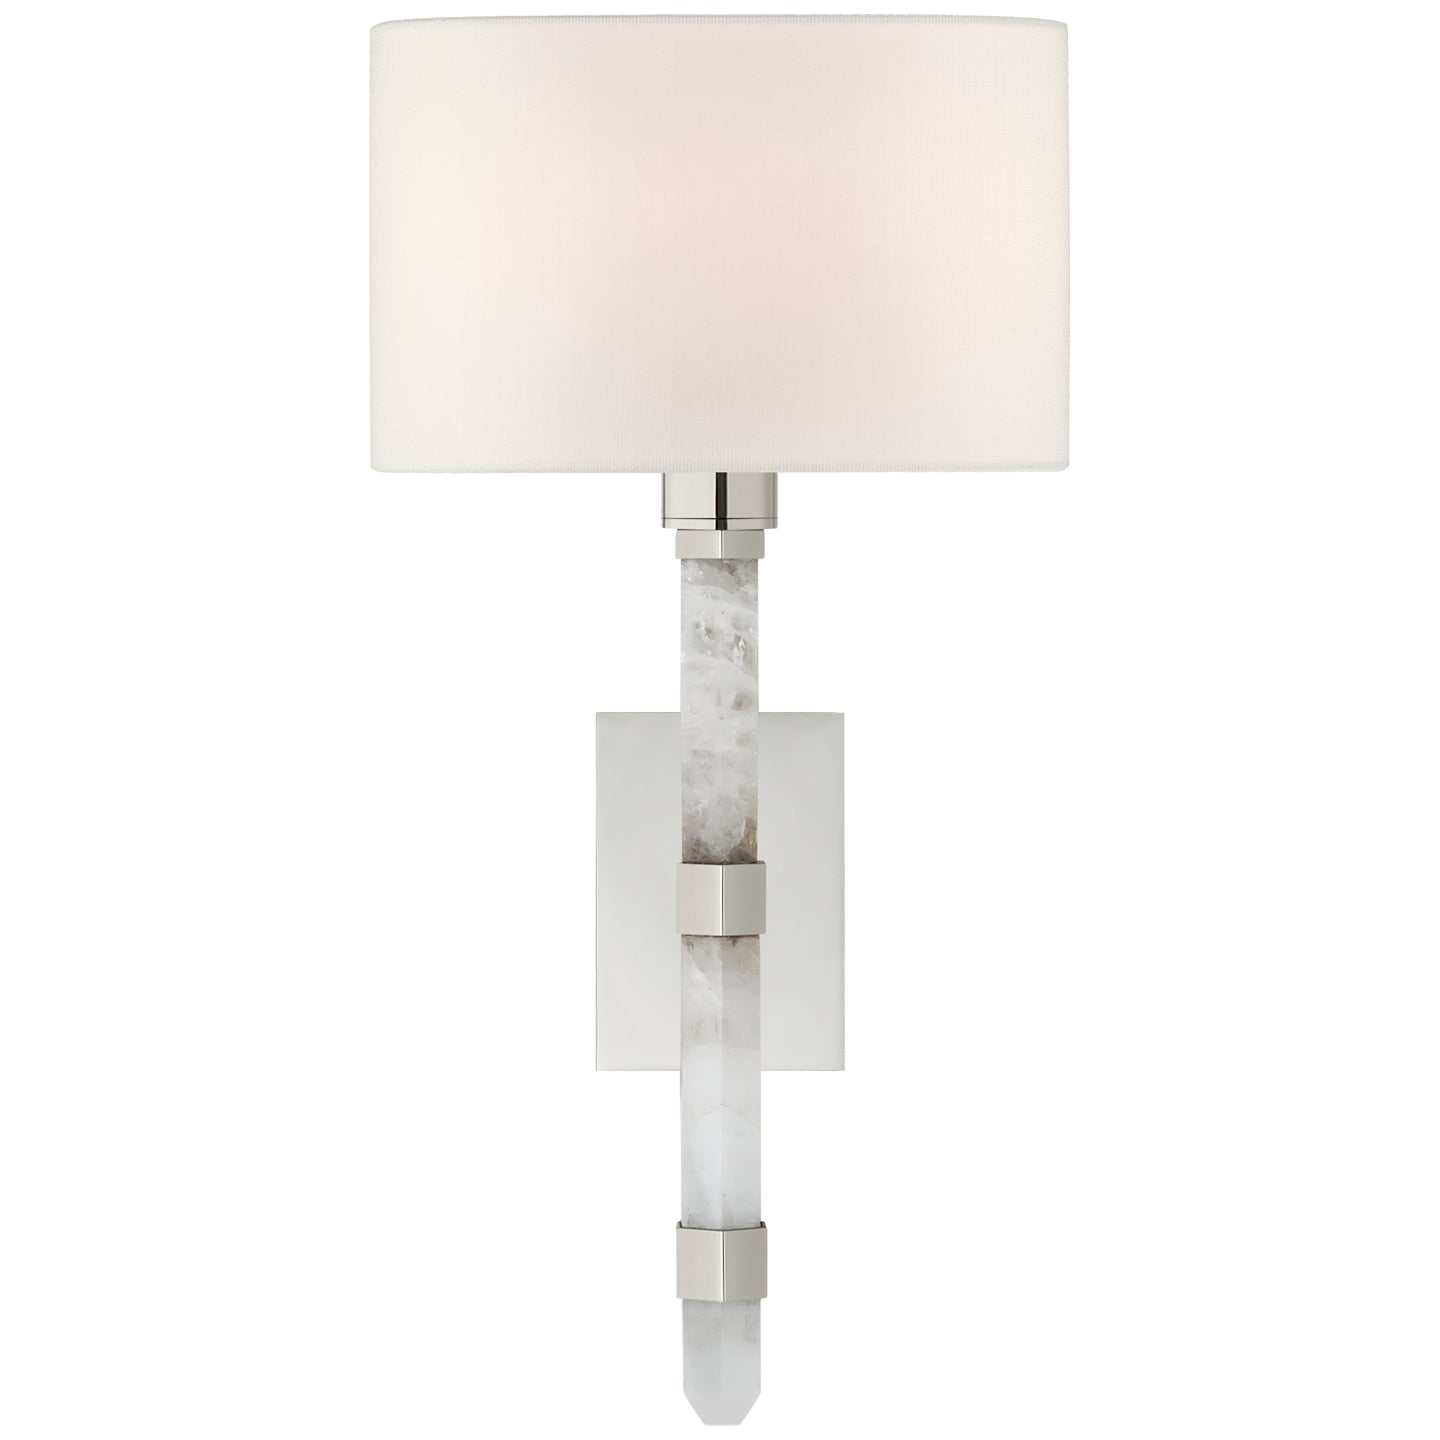 Visual Comfort Signature - SK 2902PN/Q-L - One Light Wall Sconce - Adaline - Polished Nickel